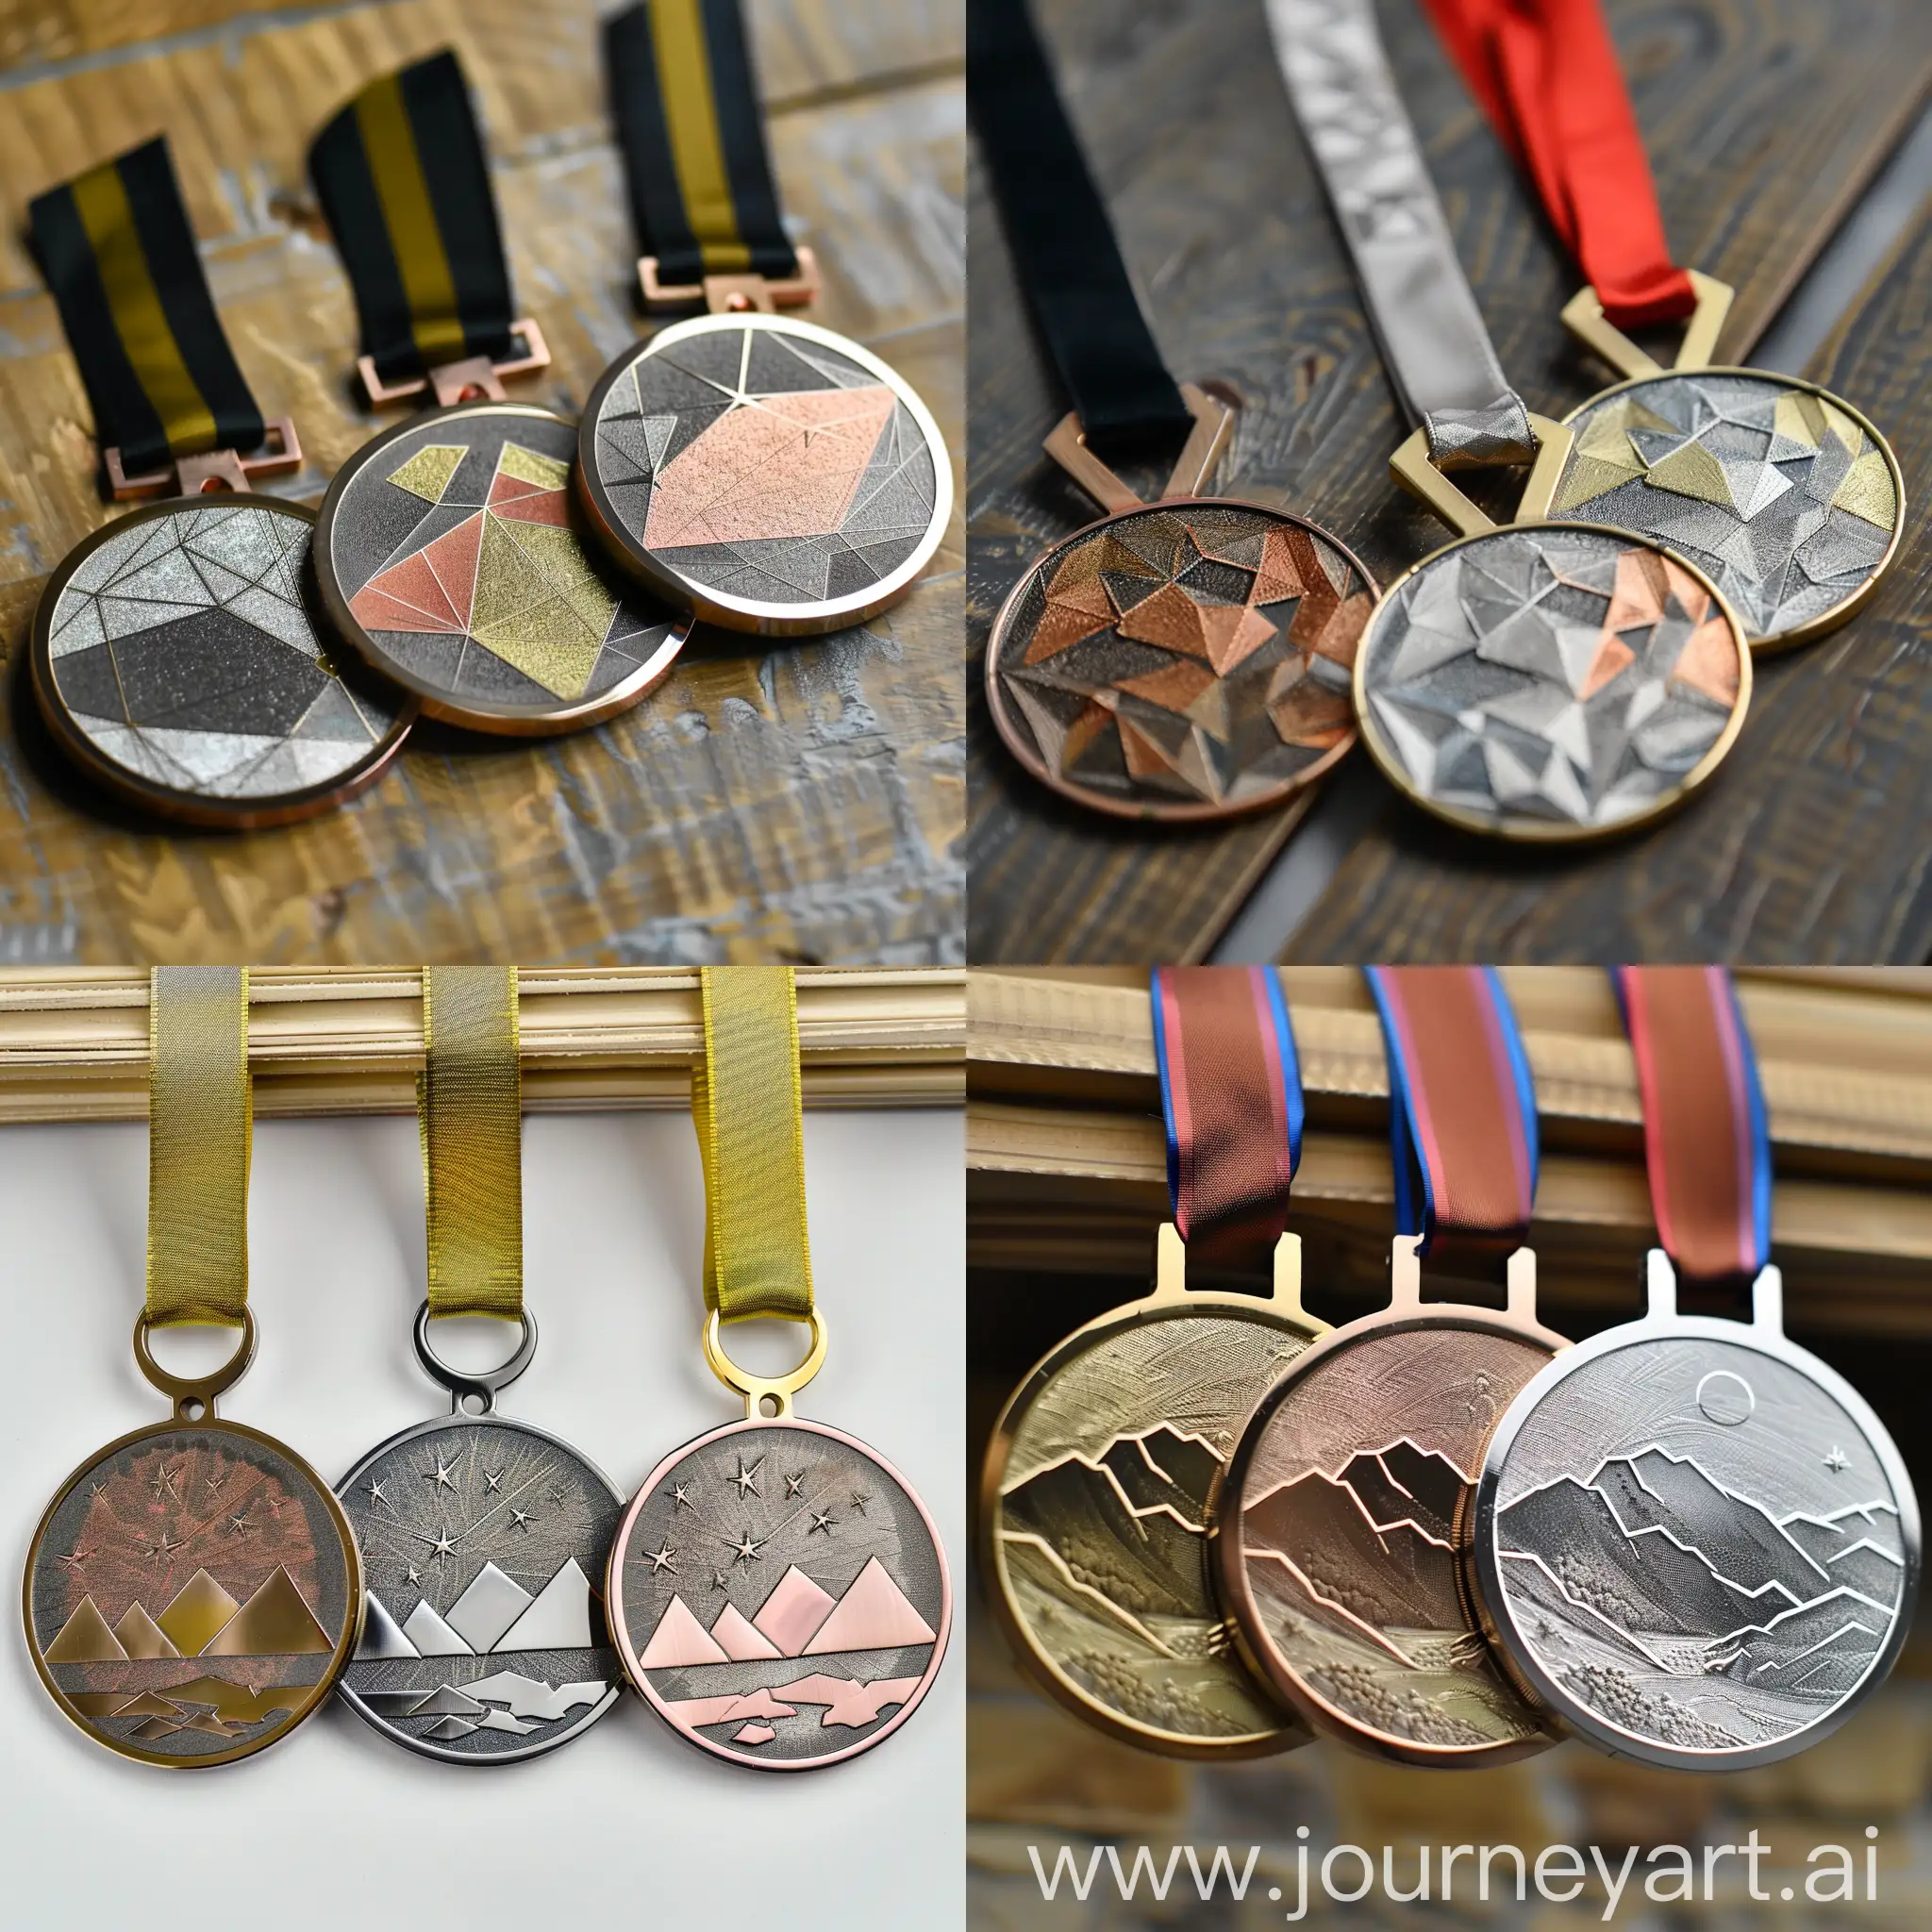 Cross-country race medals, geometric shapes